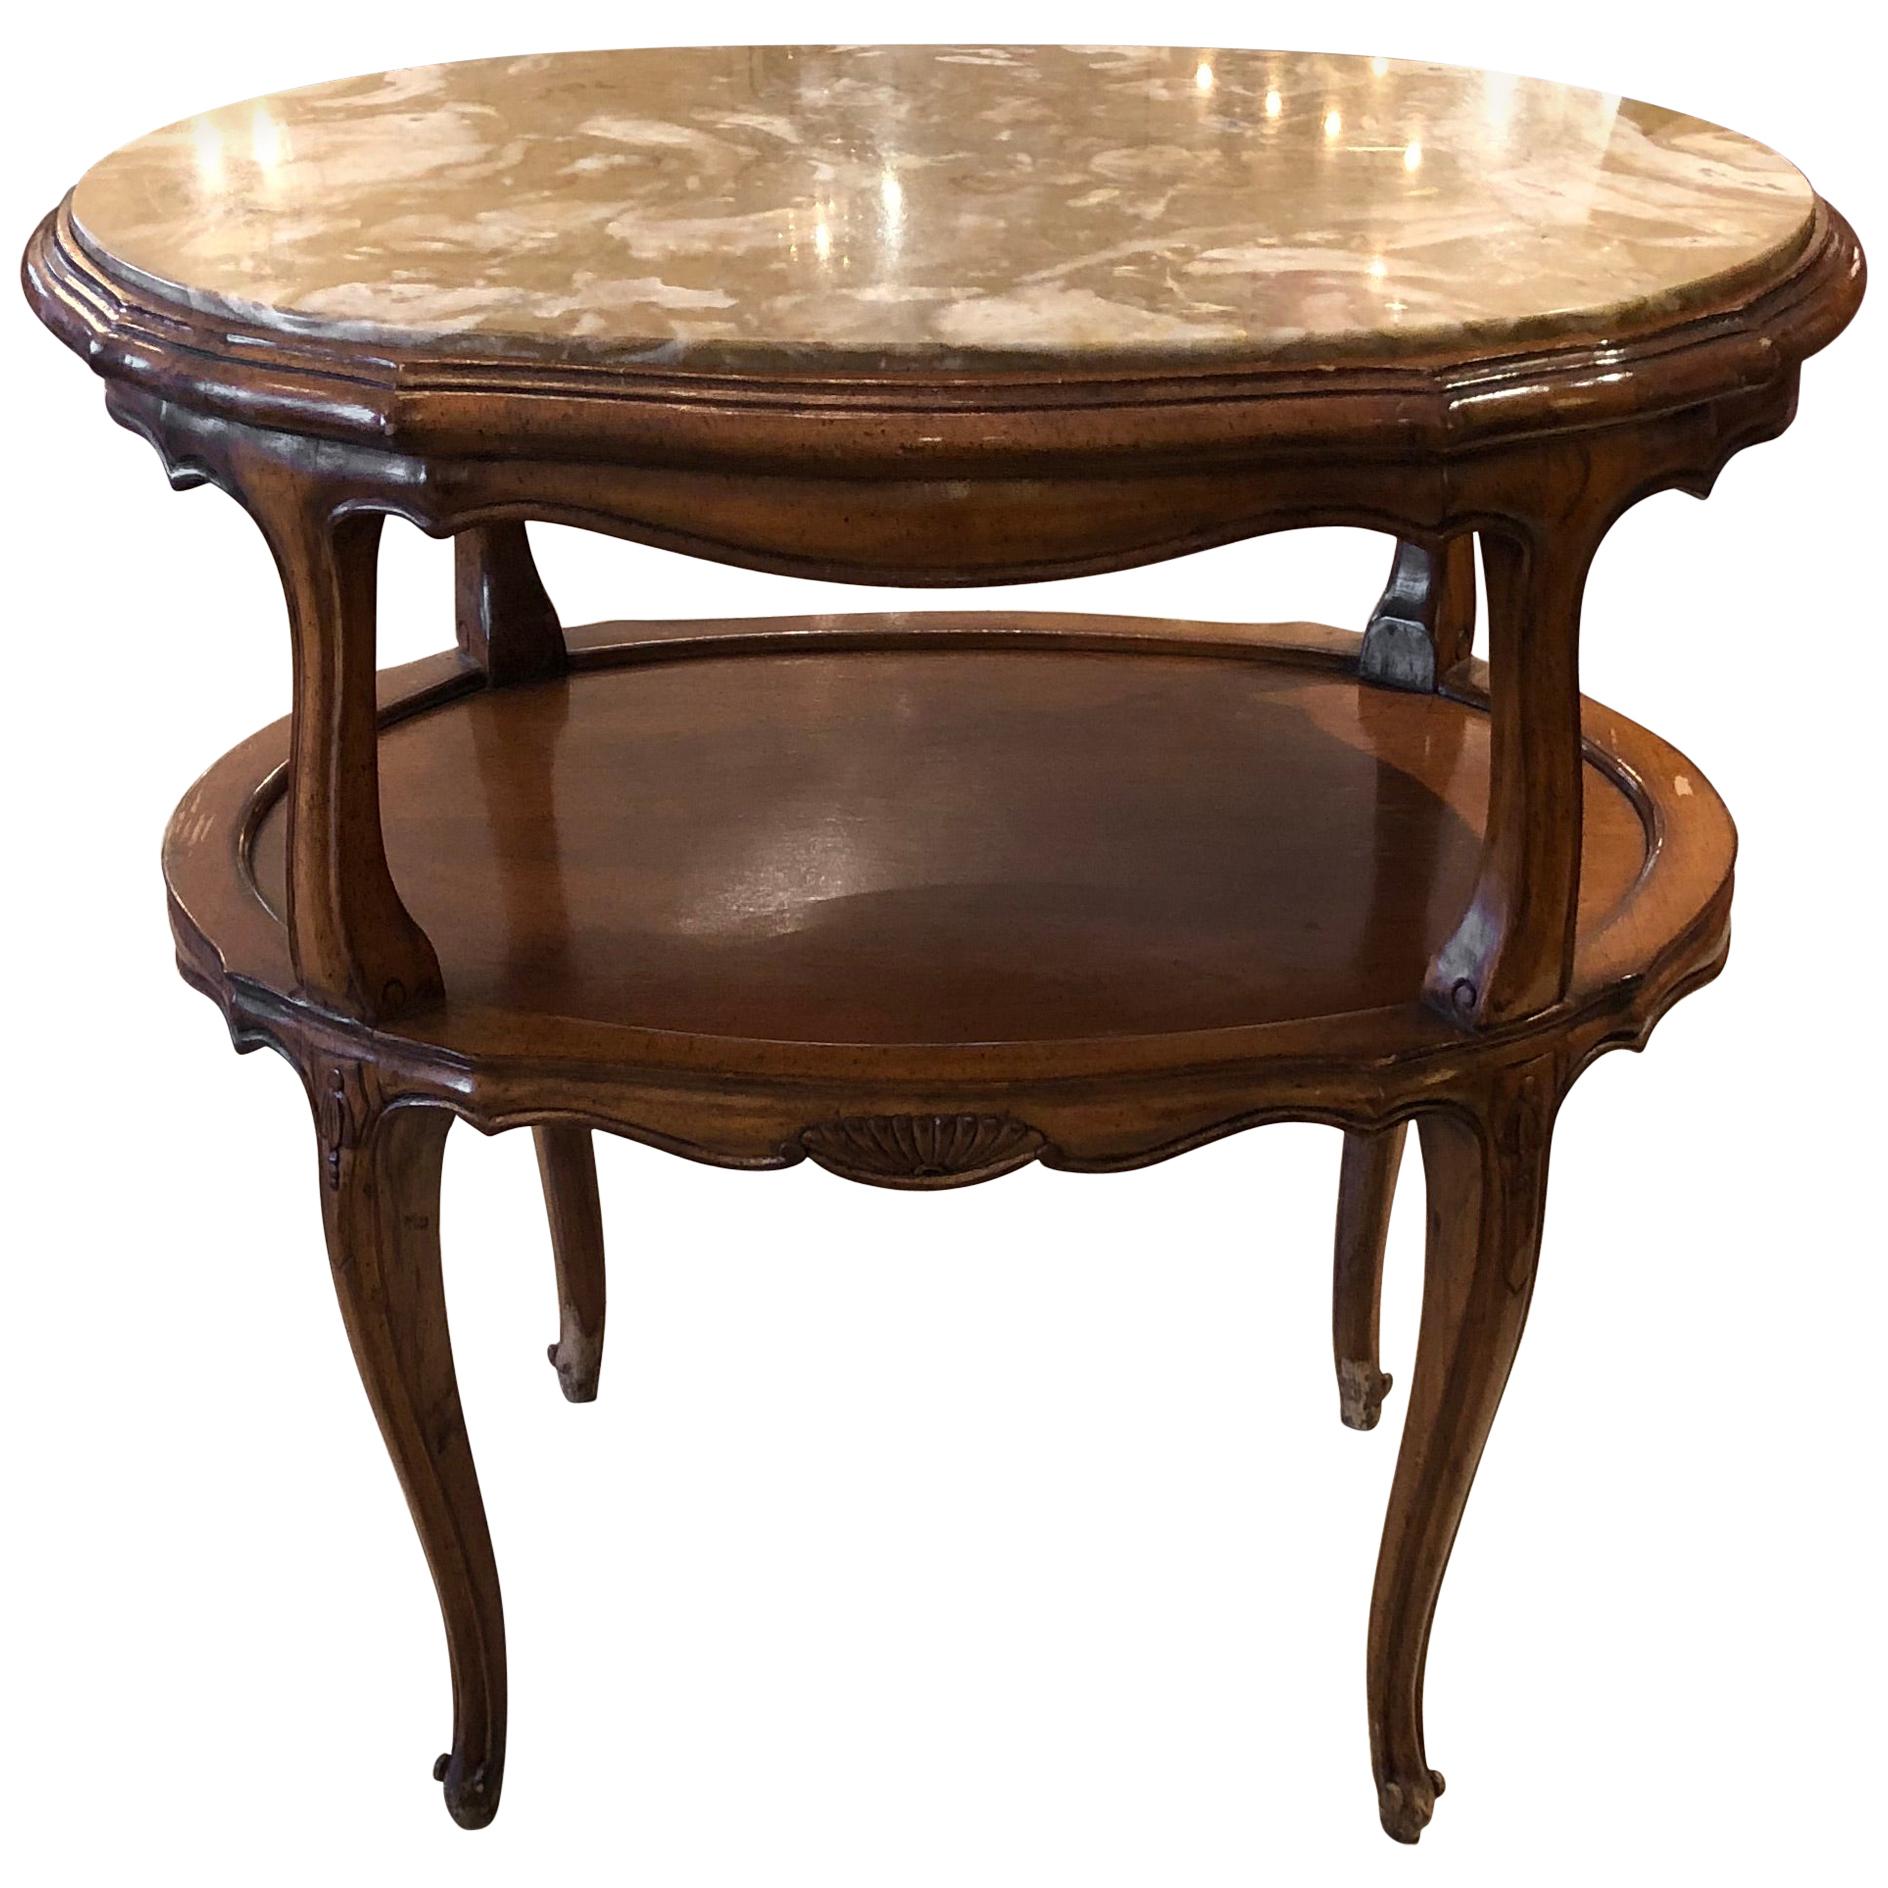 Refined French Provincial Style Marble Inset Two-Tier Fruitwood Oval Side Table